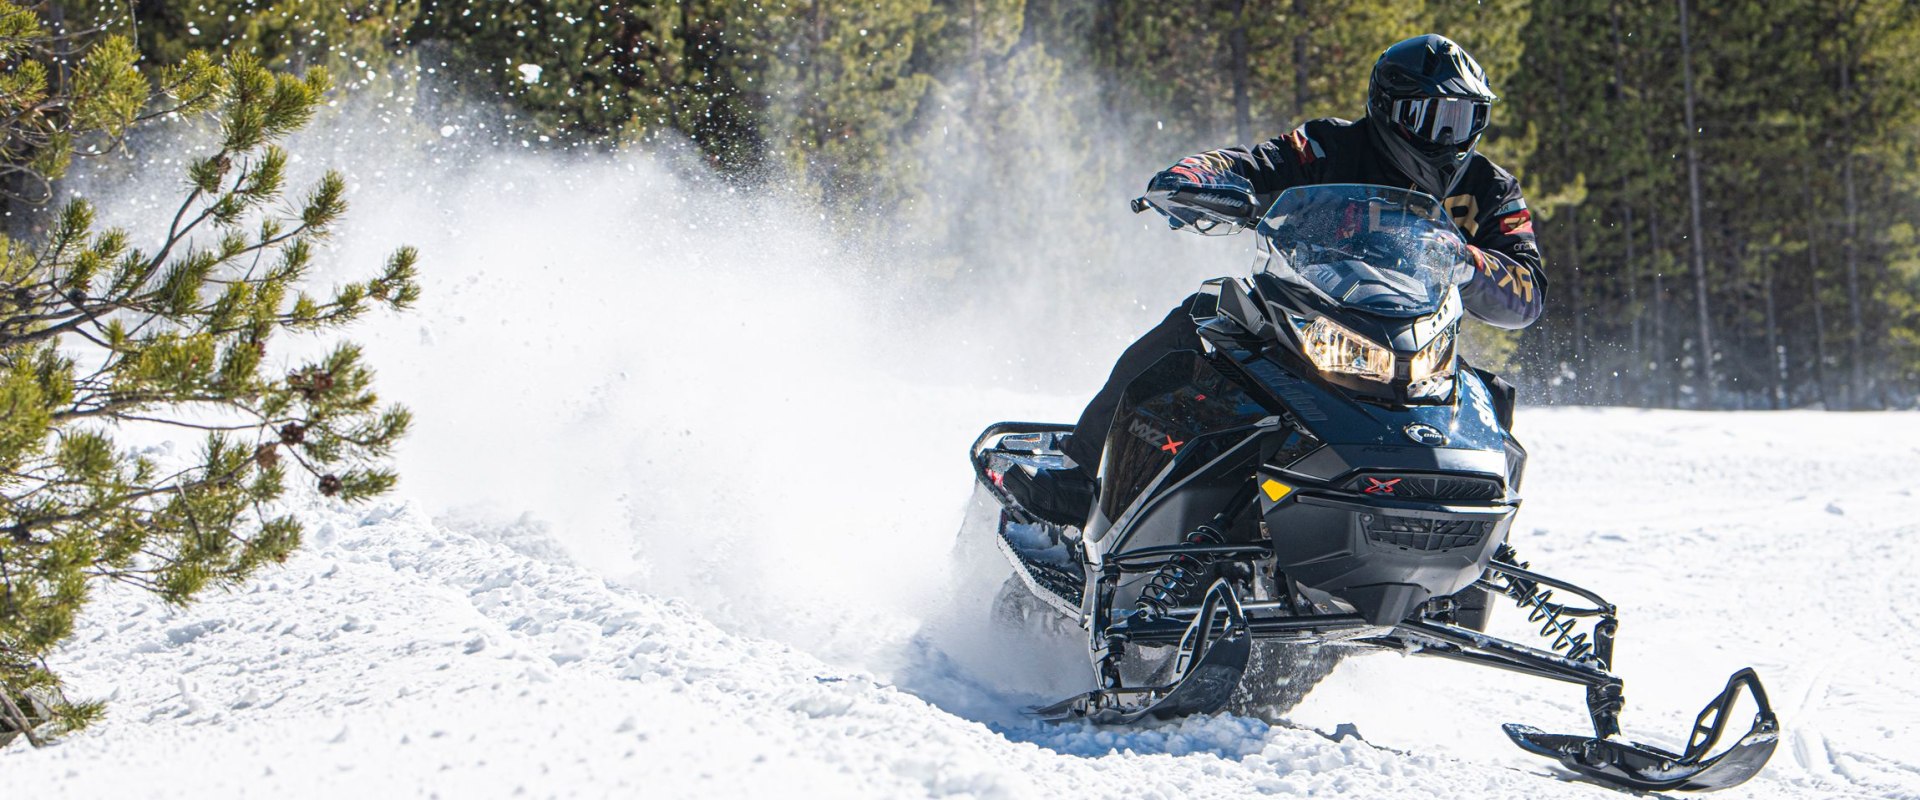 How fast can a 600cc sled go?